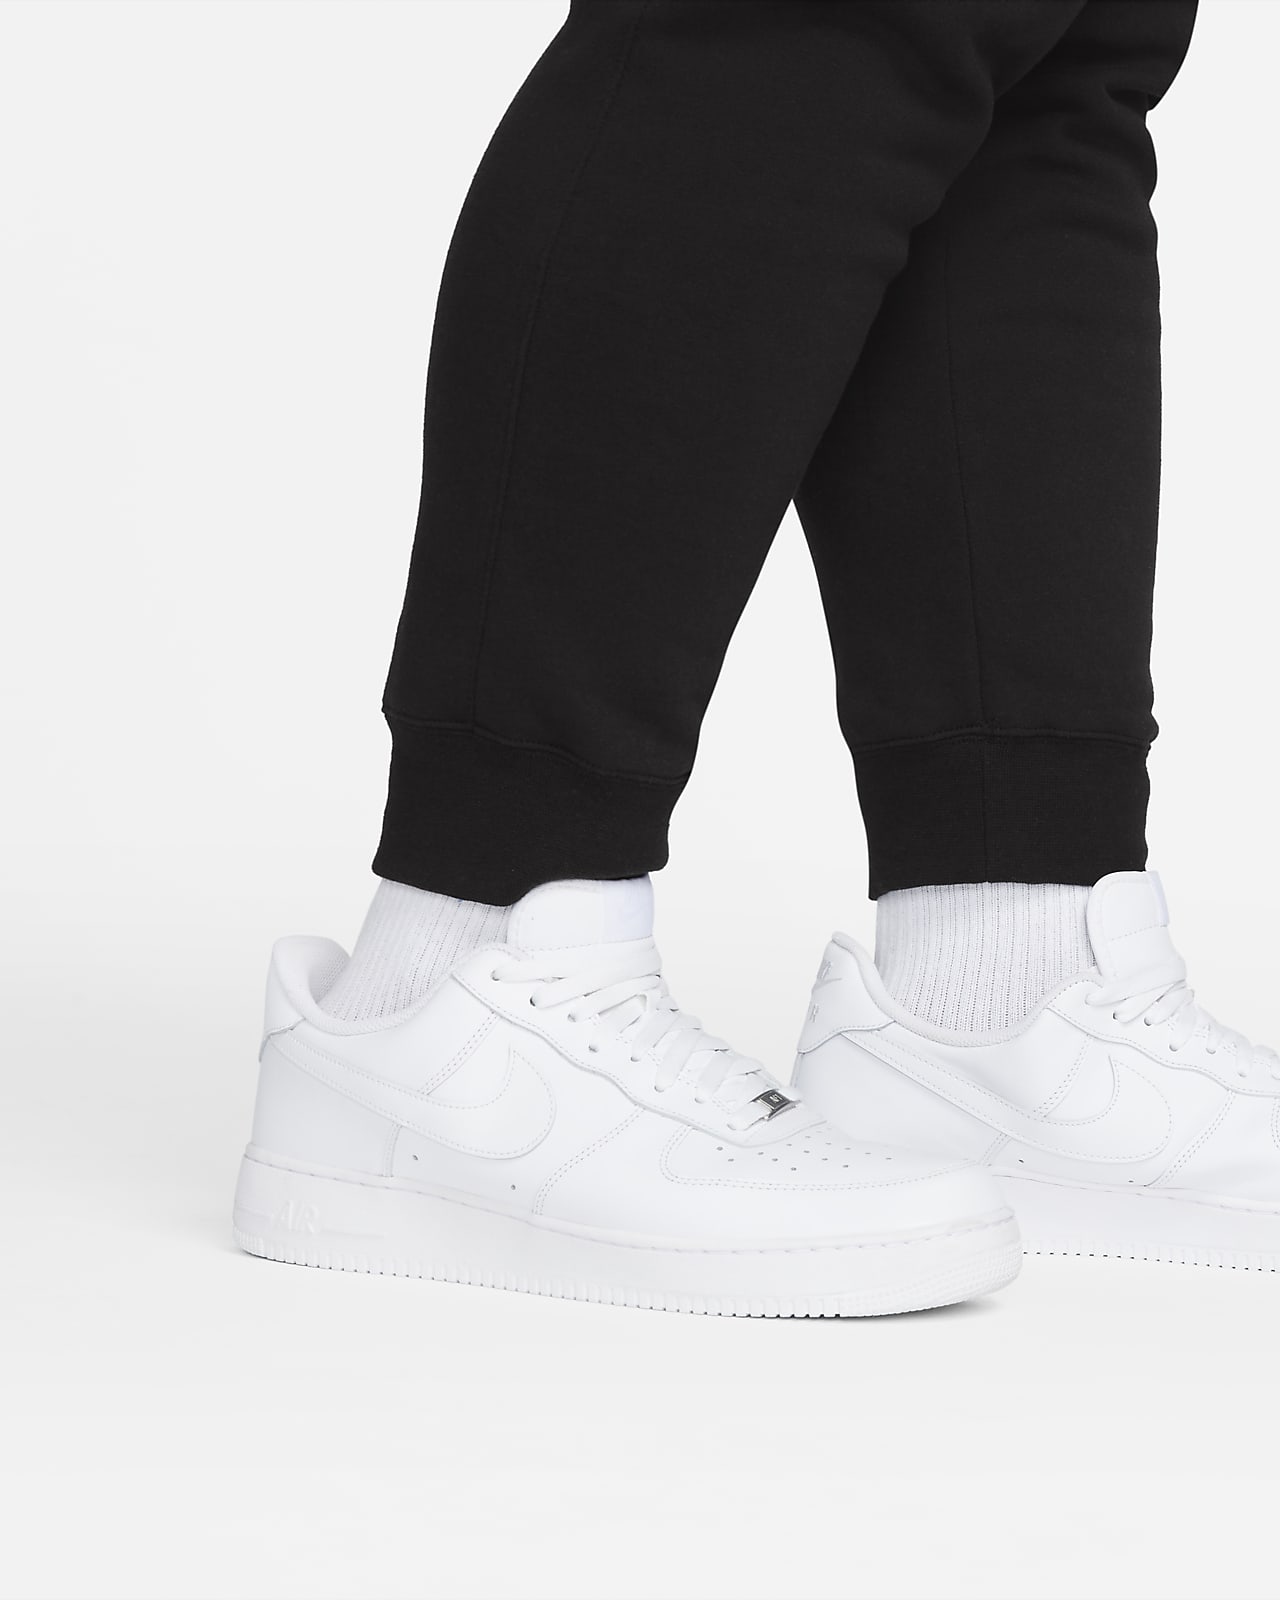 joggers with air force 1s